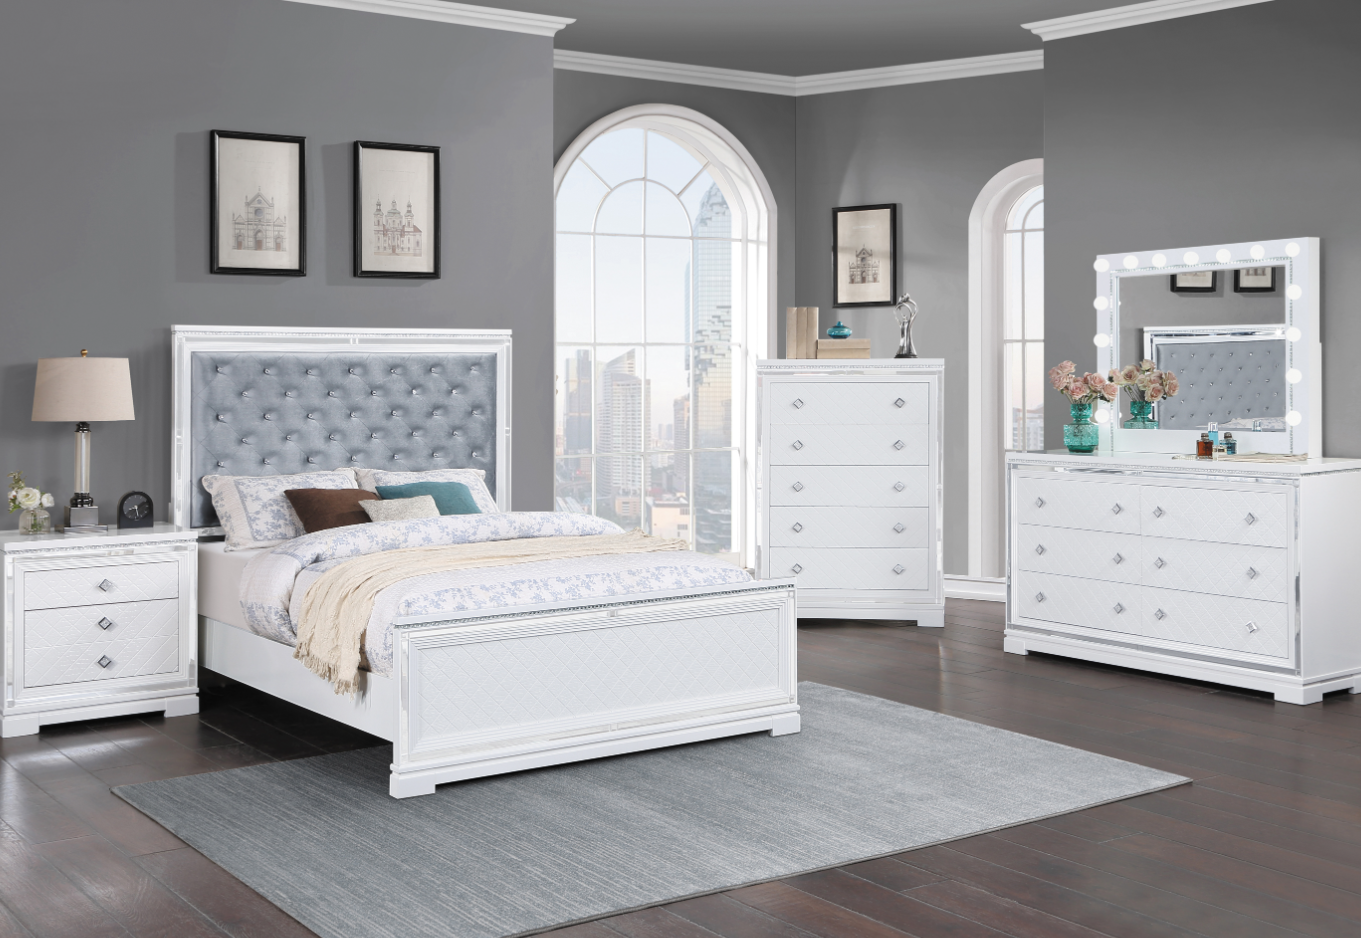 Eleanor Collection Queen Bed with Upholstered Headboard in White